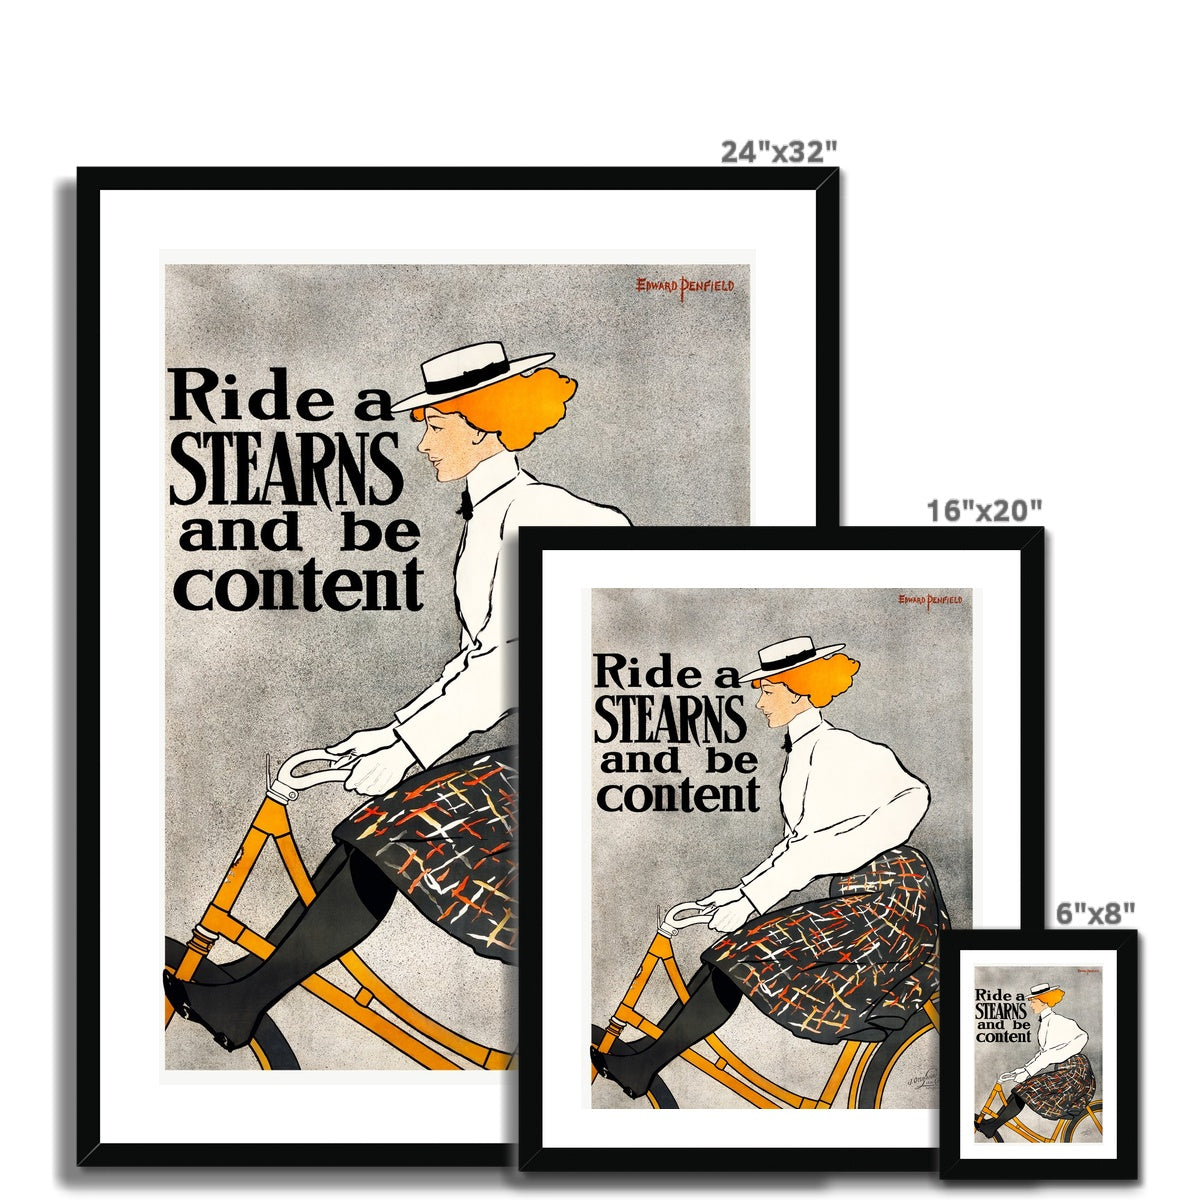 Penfield - Ride a Stearns and be content gerahmtes Poster - Atopurinto